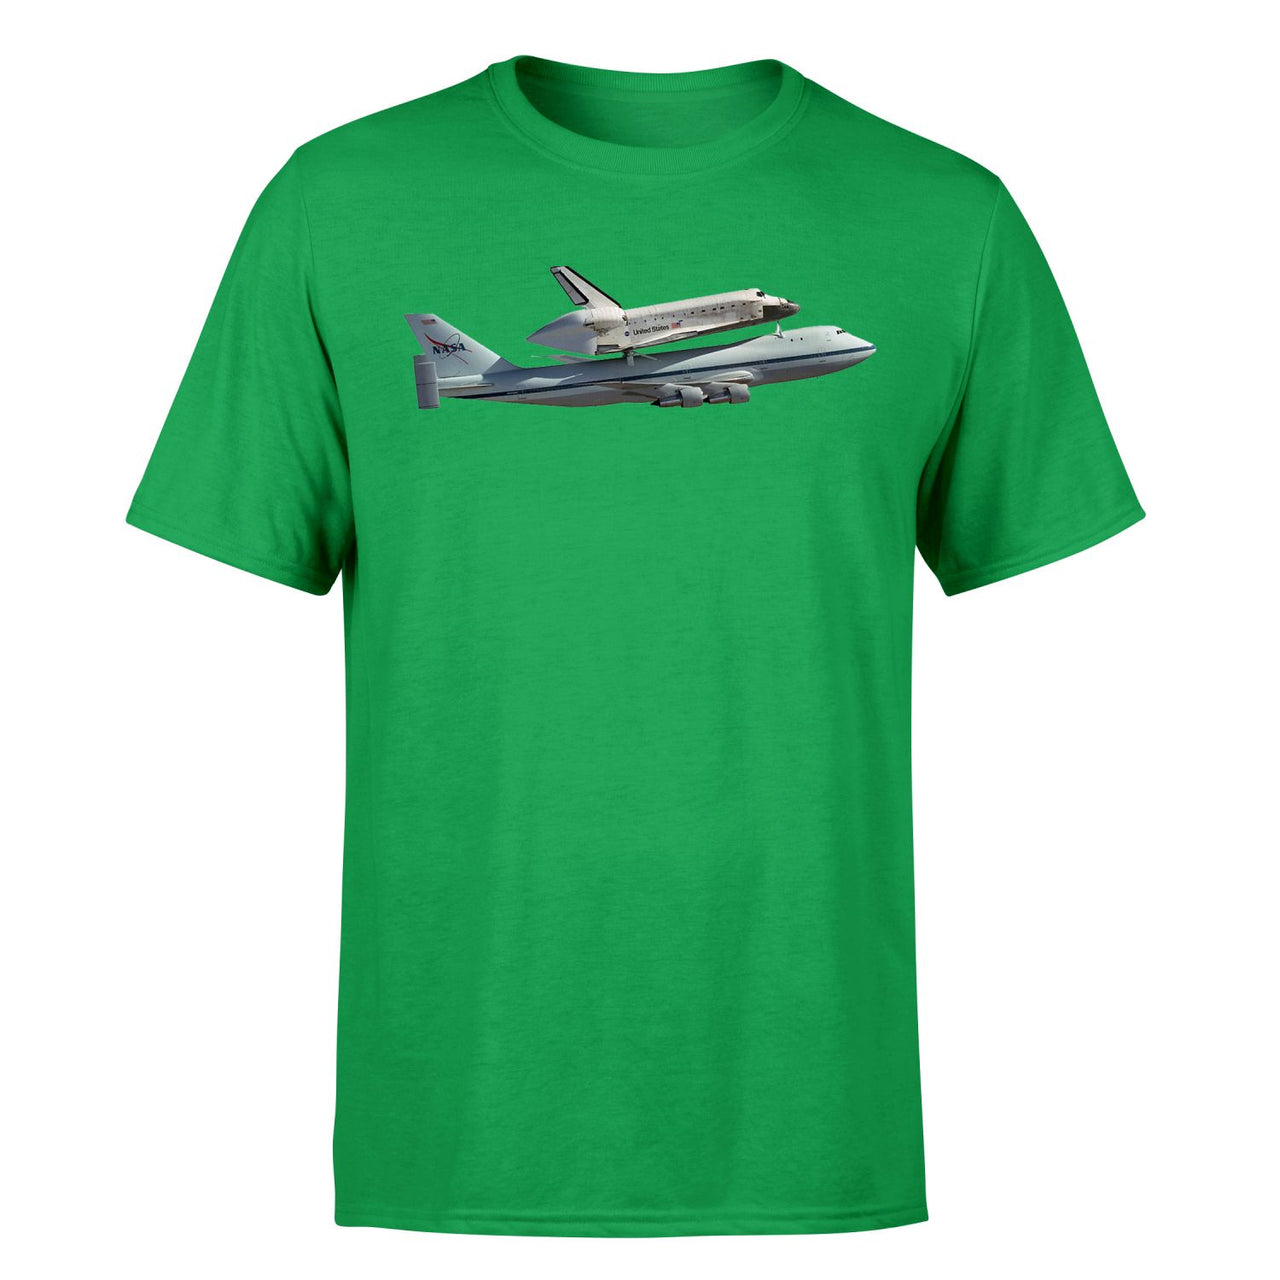 Space shuttle on 747 Designed T-Shirts